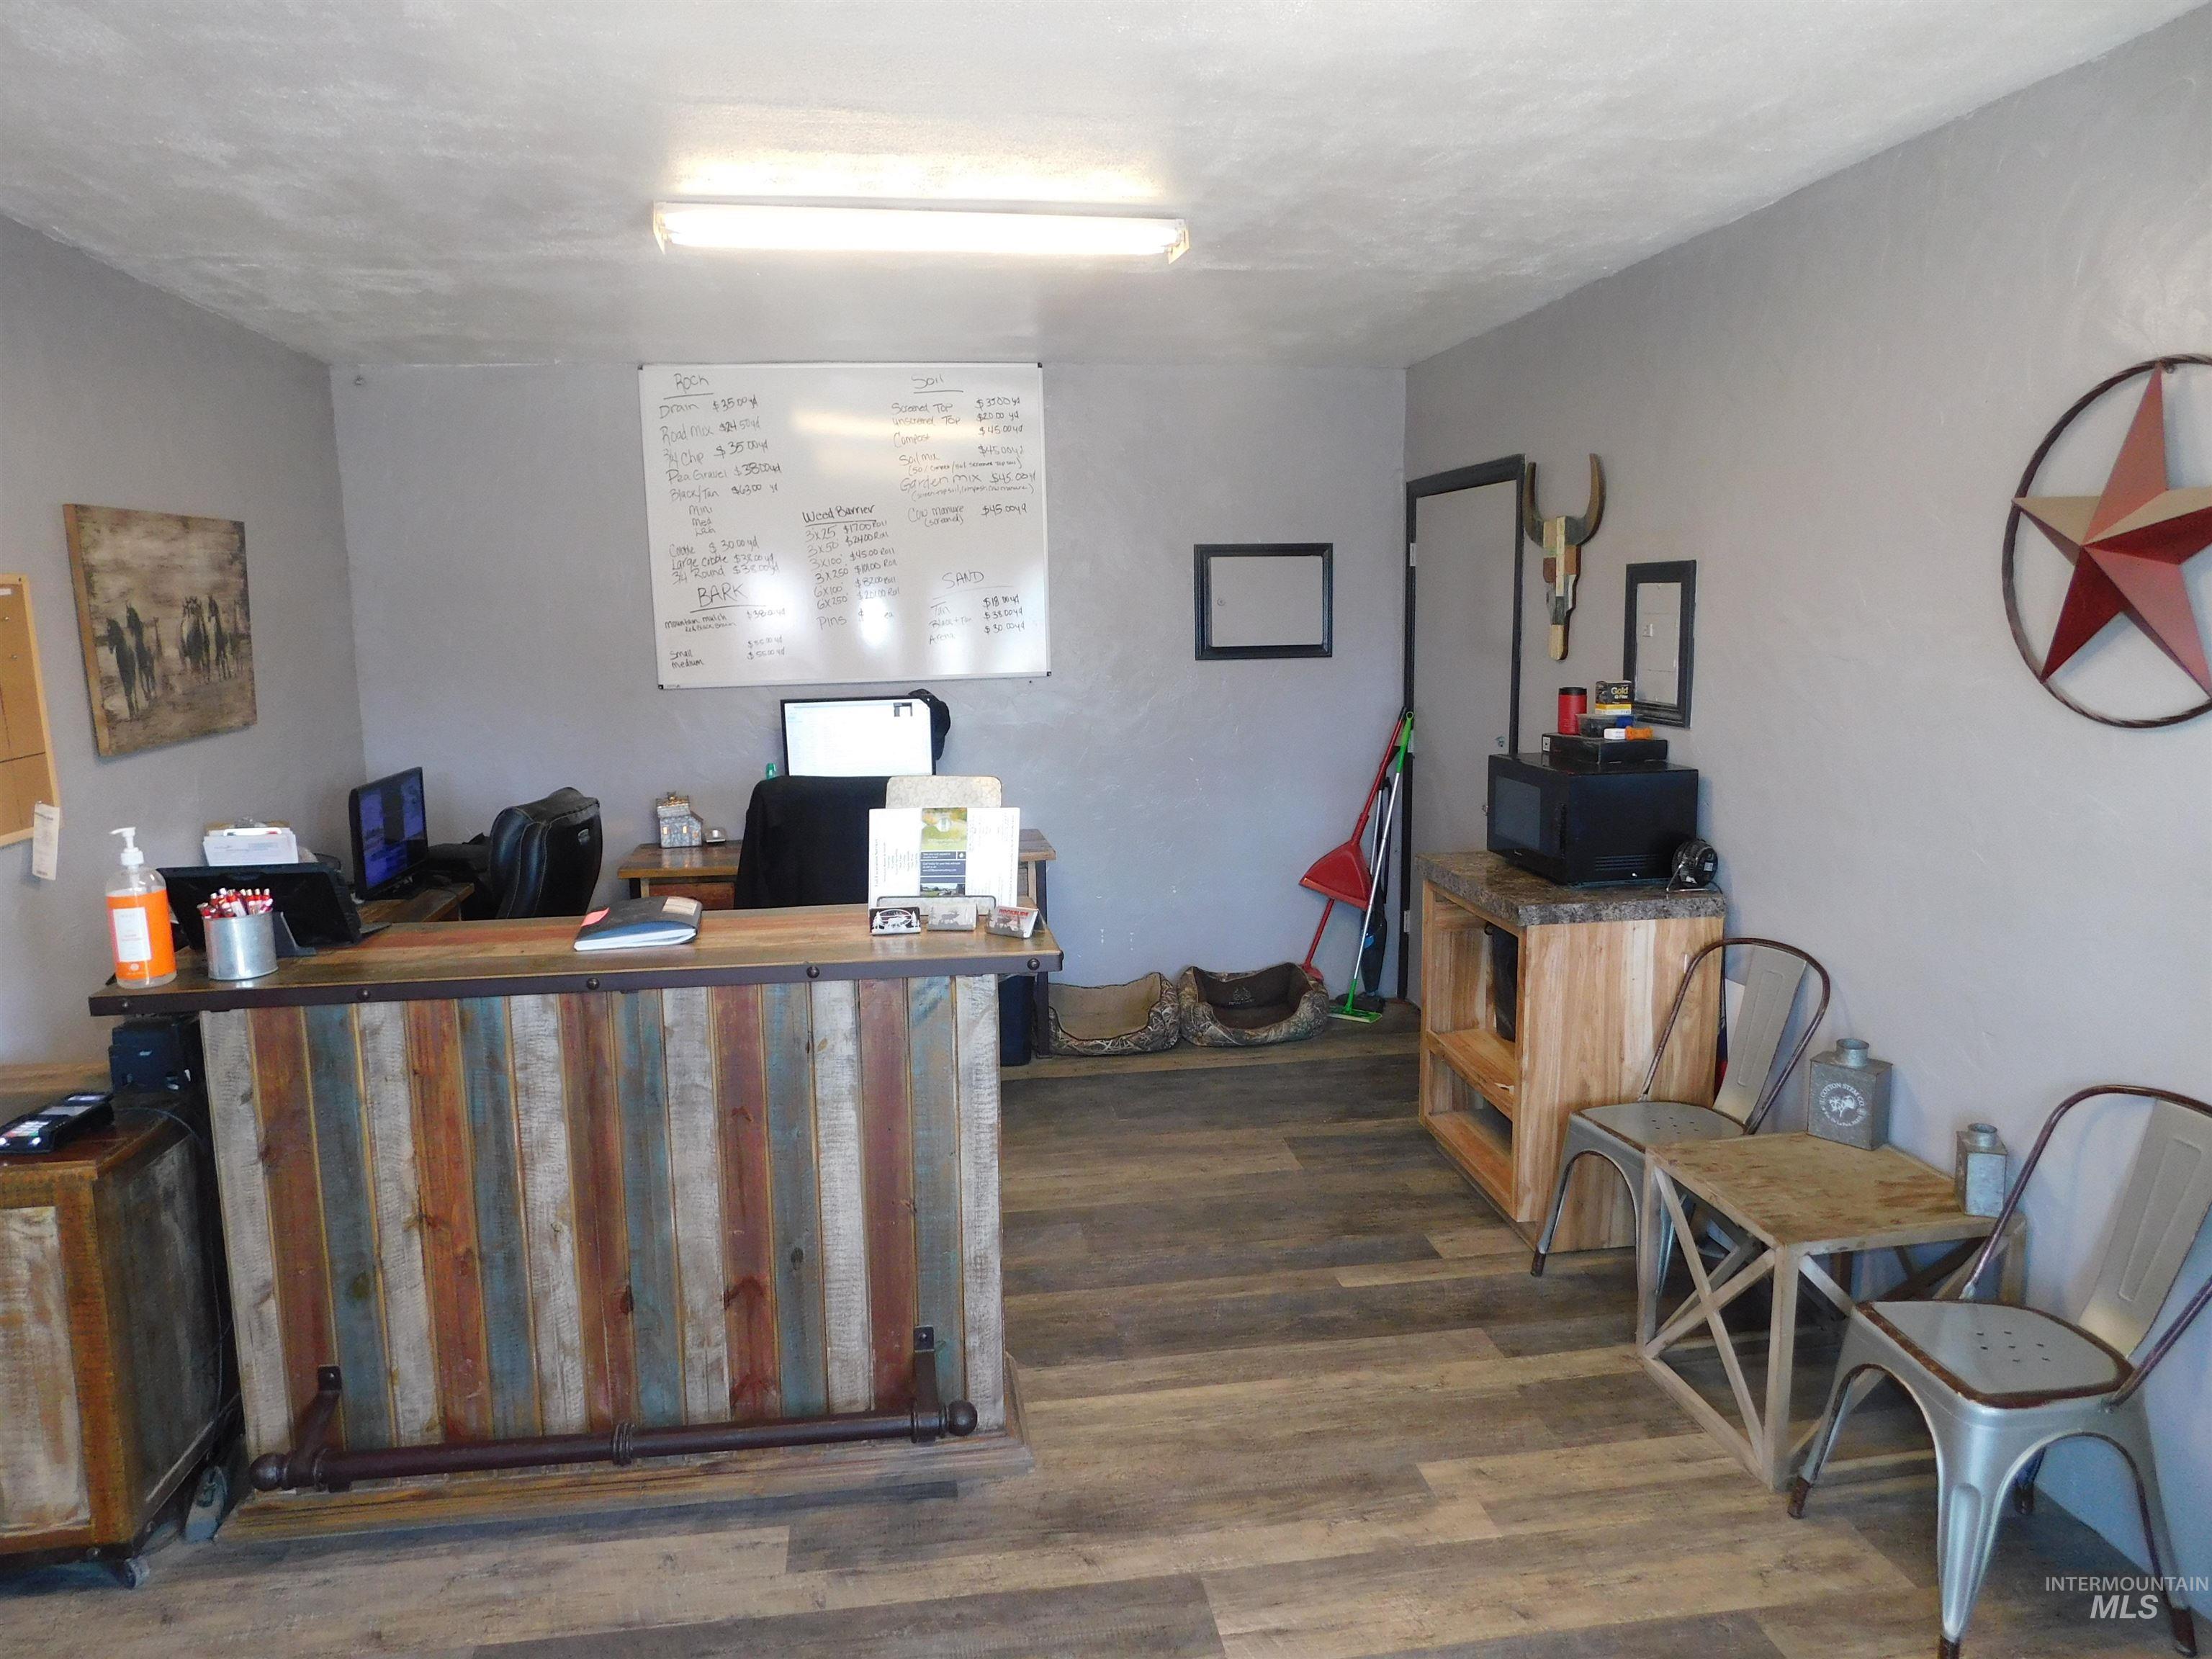 303 Main, Homedale, Idaho 83628, Business/Commercial For Sale, Price $399,500,MLS 98890282